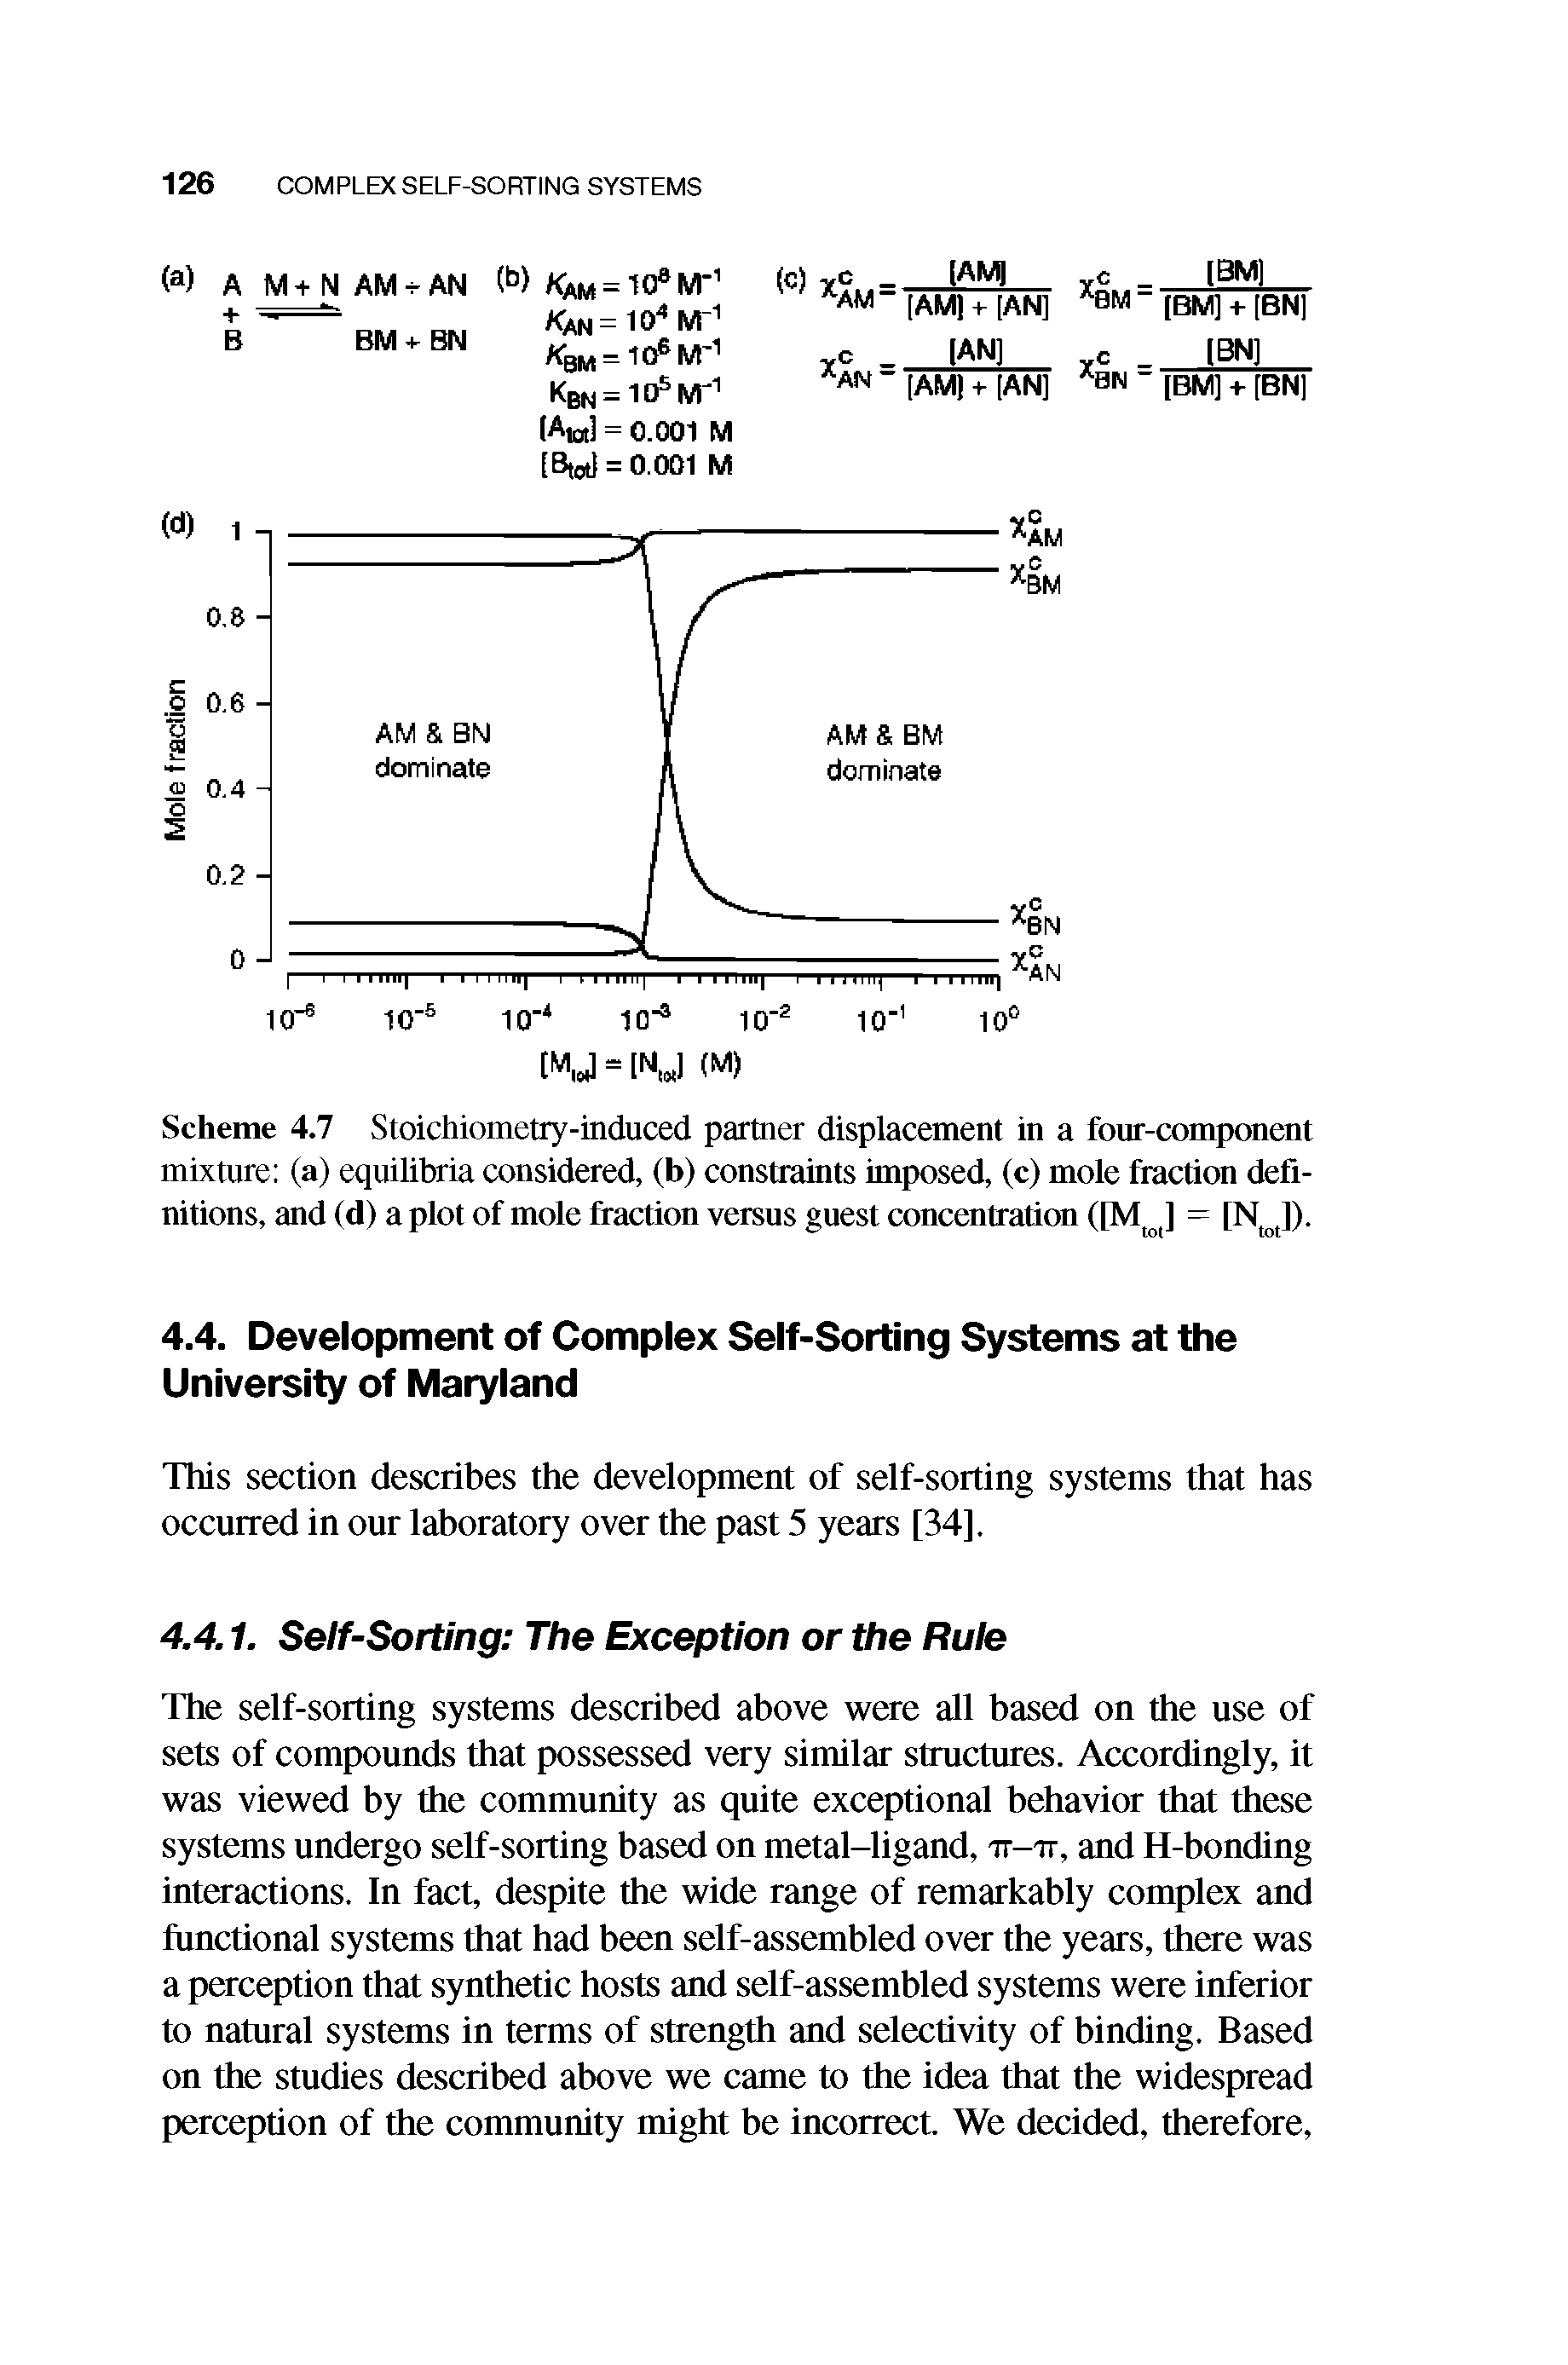 Scheme 4.7 Stoichiometry-induced partner displacement in a four-component mixture (a) equilibria considered, (b) constraints imposed, (c) mole fraction definitions, and (d) a plot of mole fraction versus guest concentration ([M ] = [N ]).